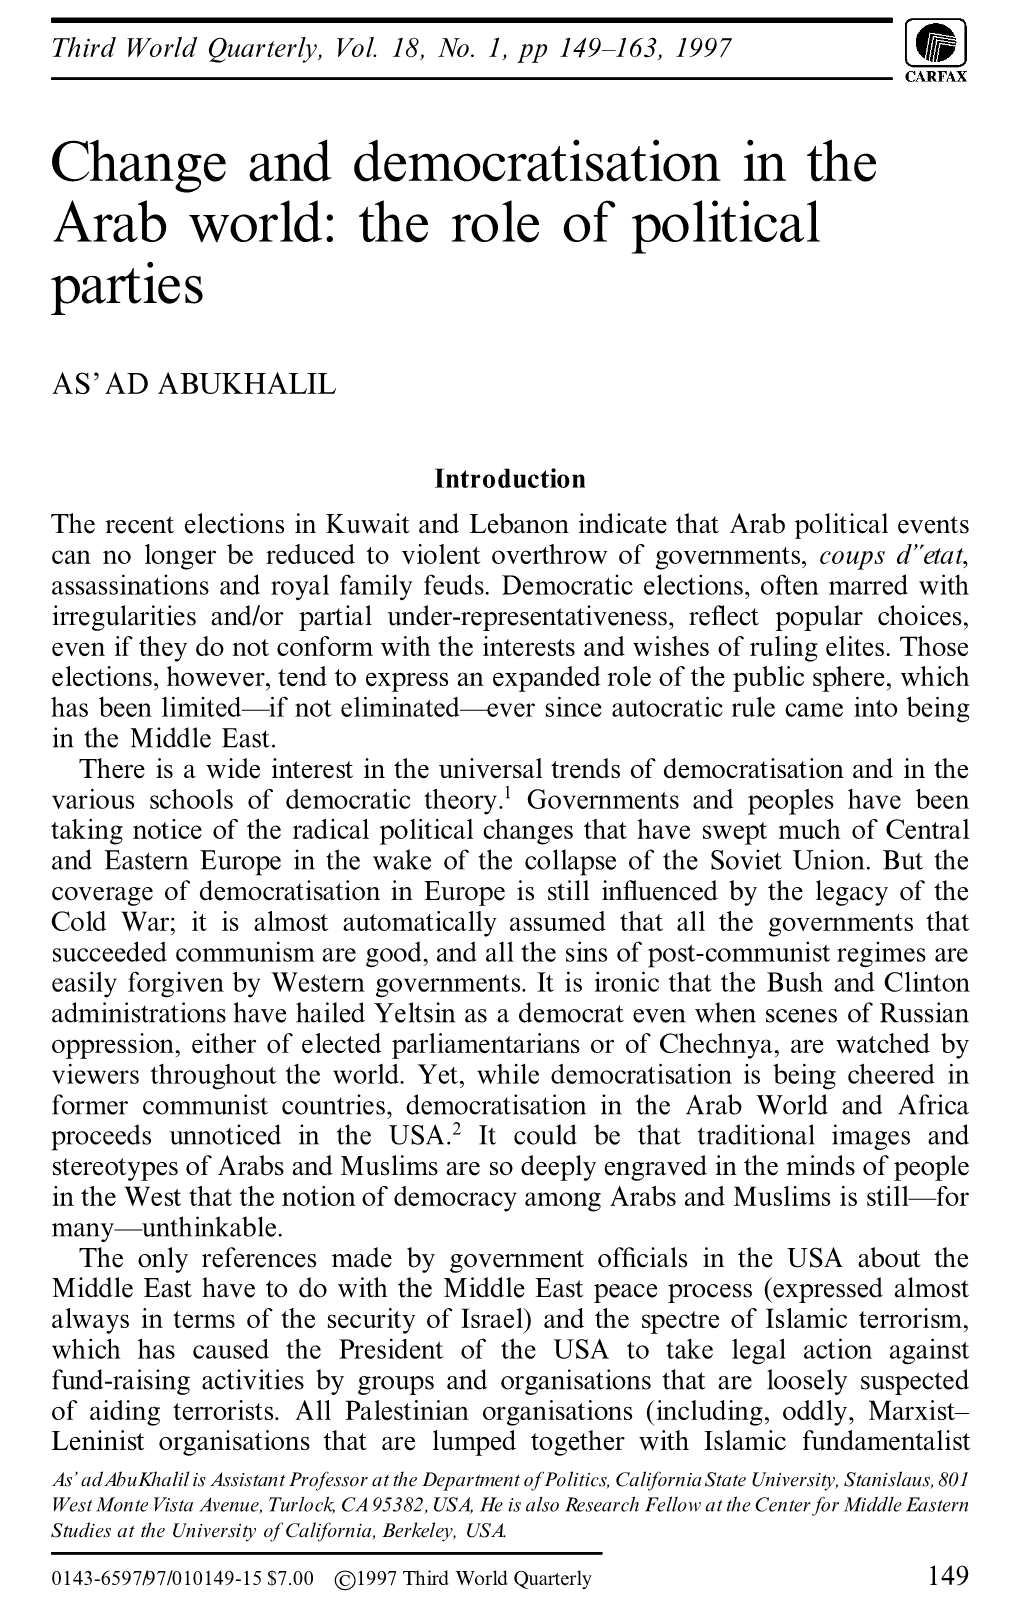 Change and Democratisation in the Arab World: the Role of Political Parties